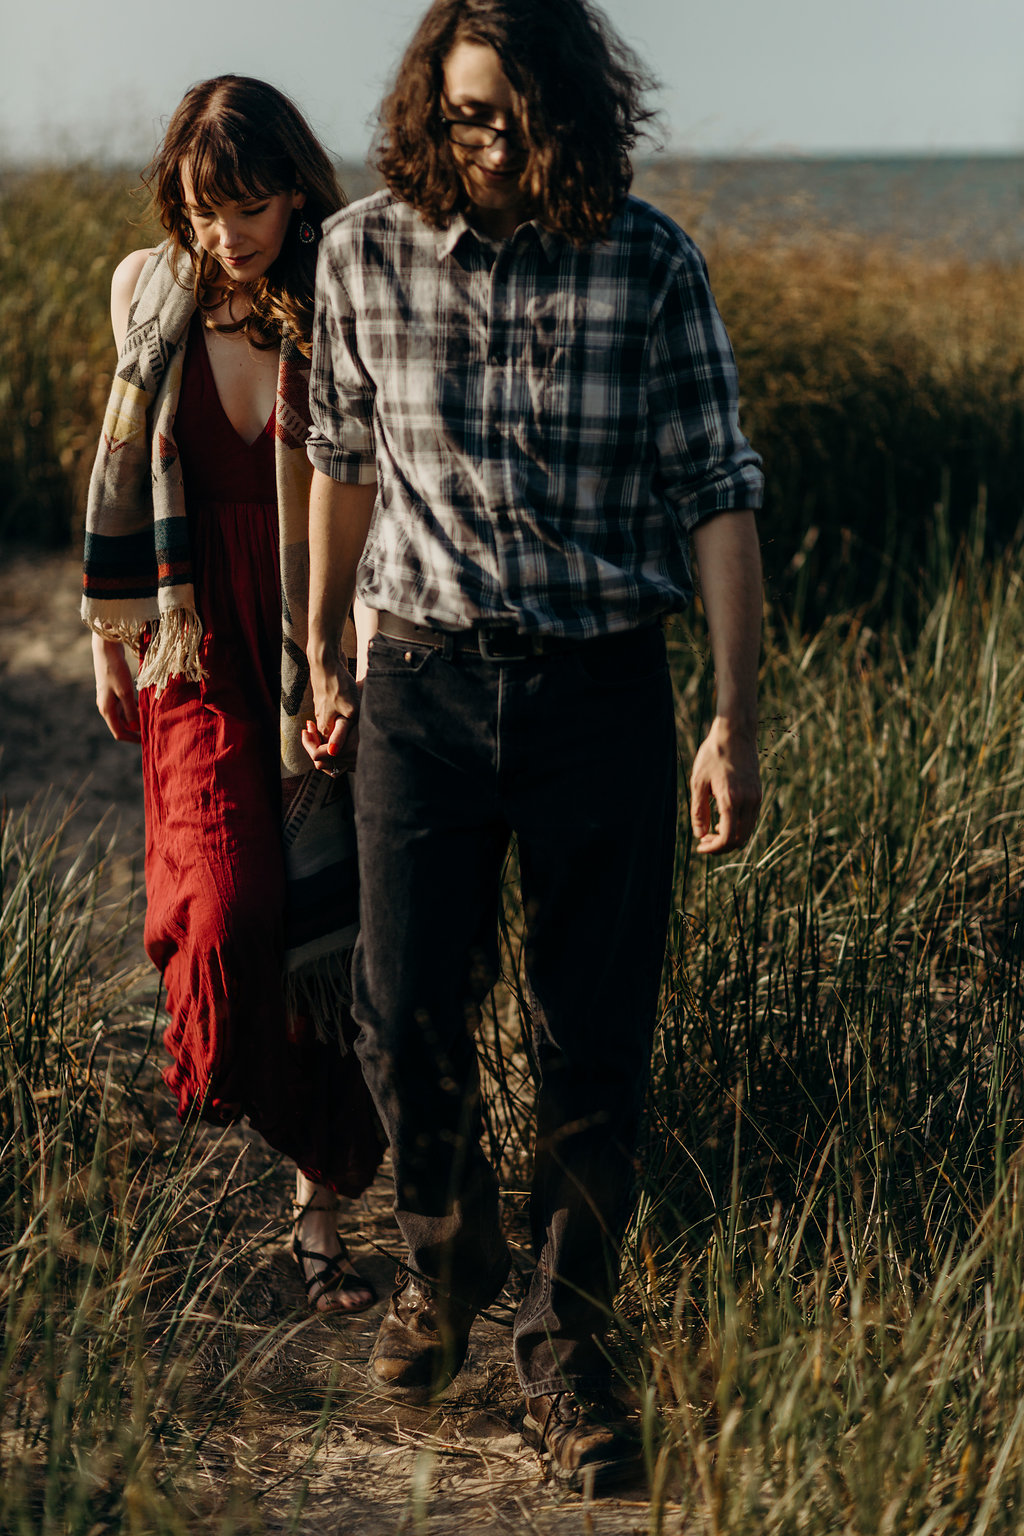 70's INSPIRED ENGAGEMENT SESSION | AIDAN + LINDSEY 56